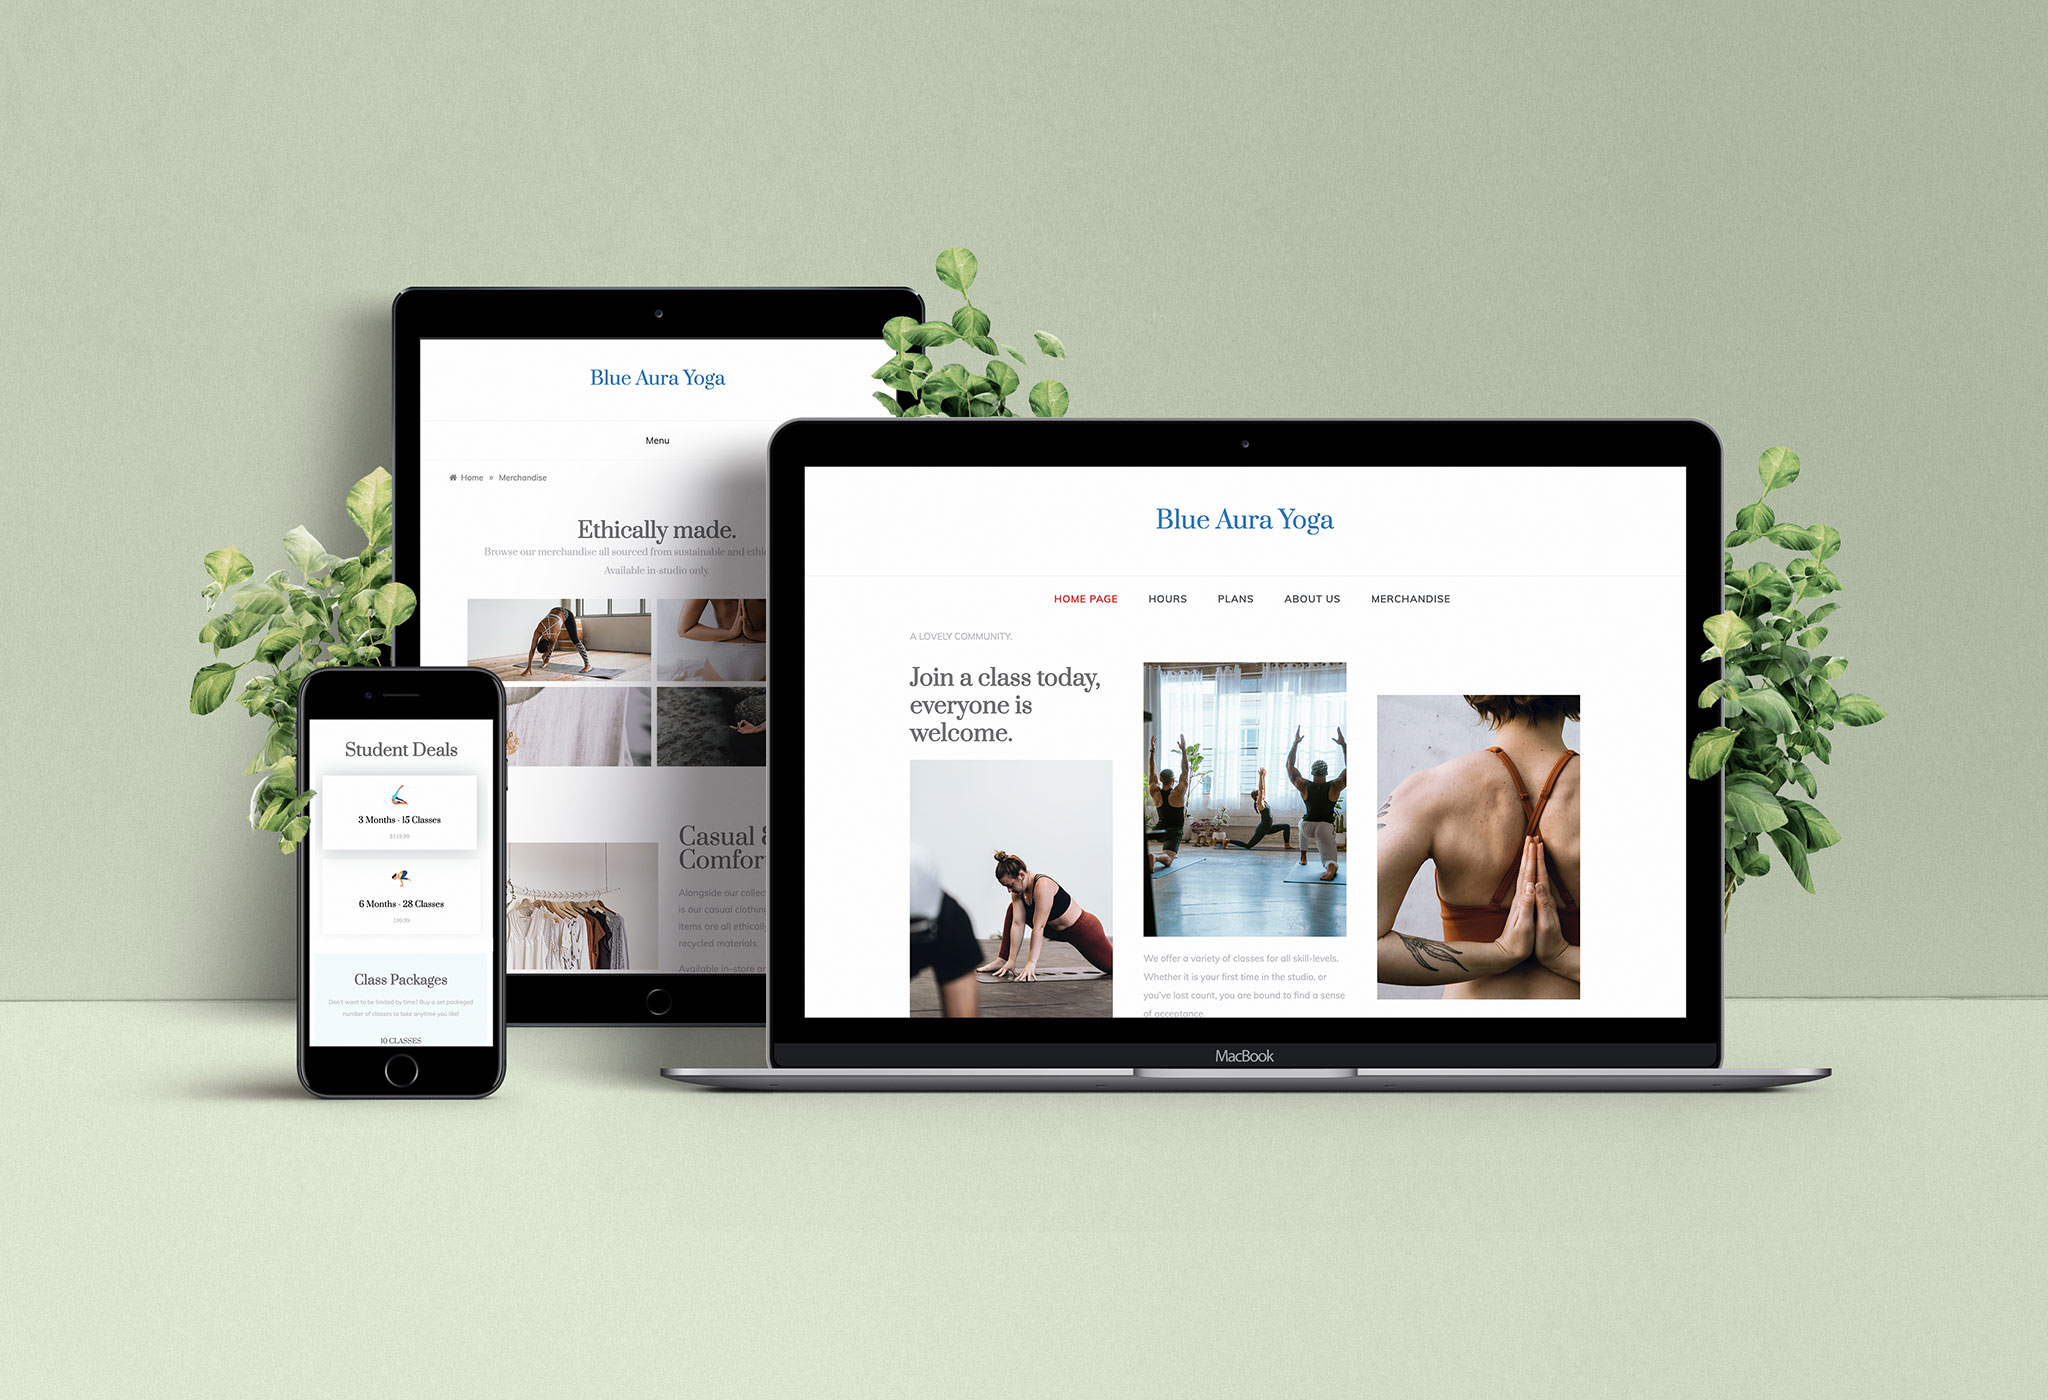 Mockup of website design for an imagined yoga studio. It is a completely responsive website design, as displayed on a laptop, mobile, and an iPhone.